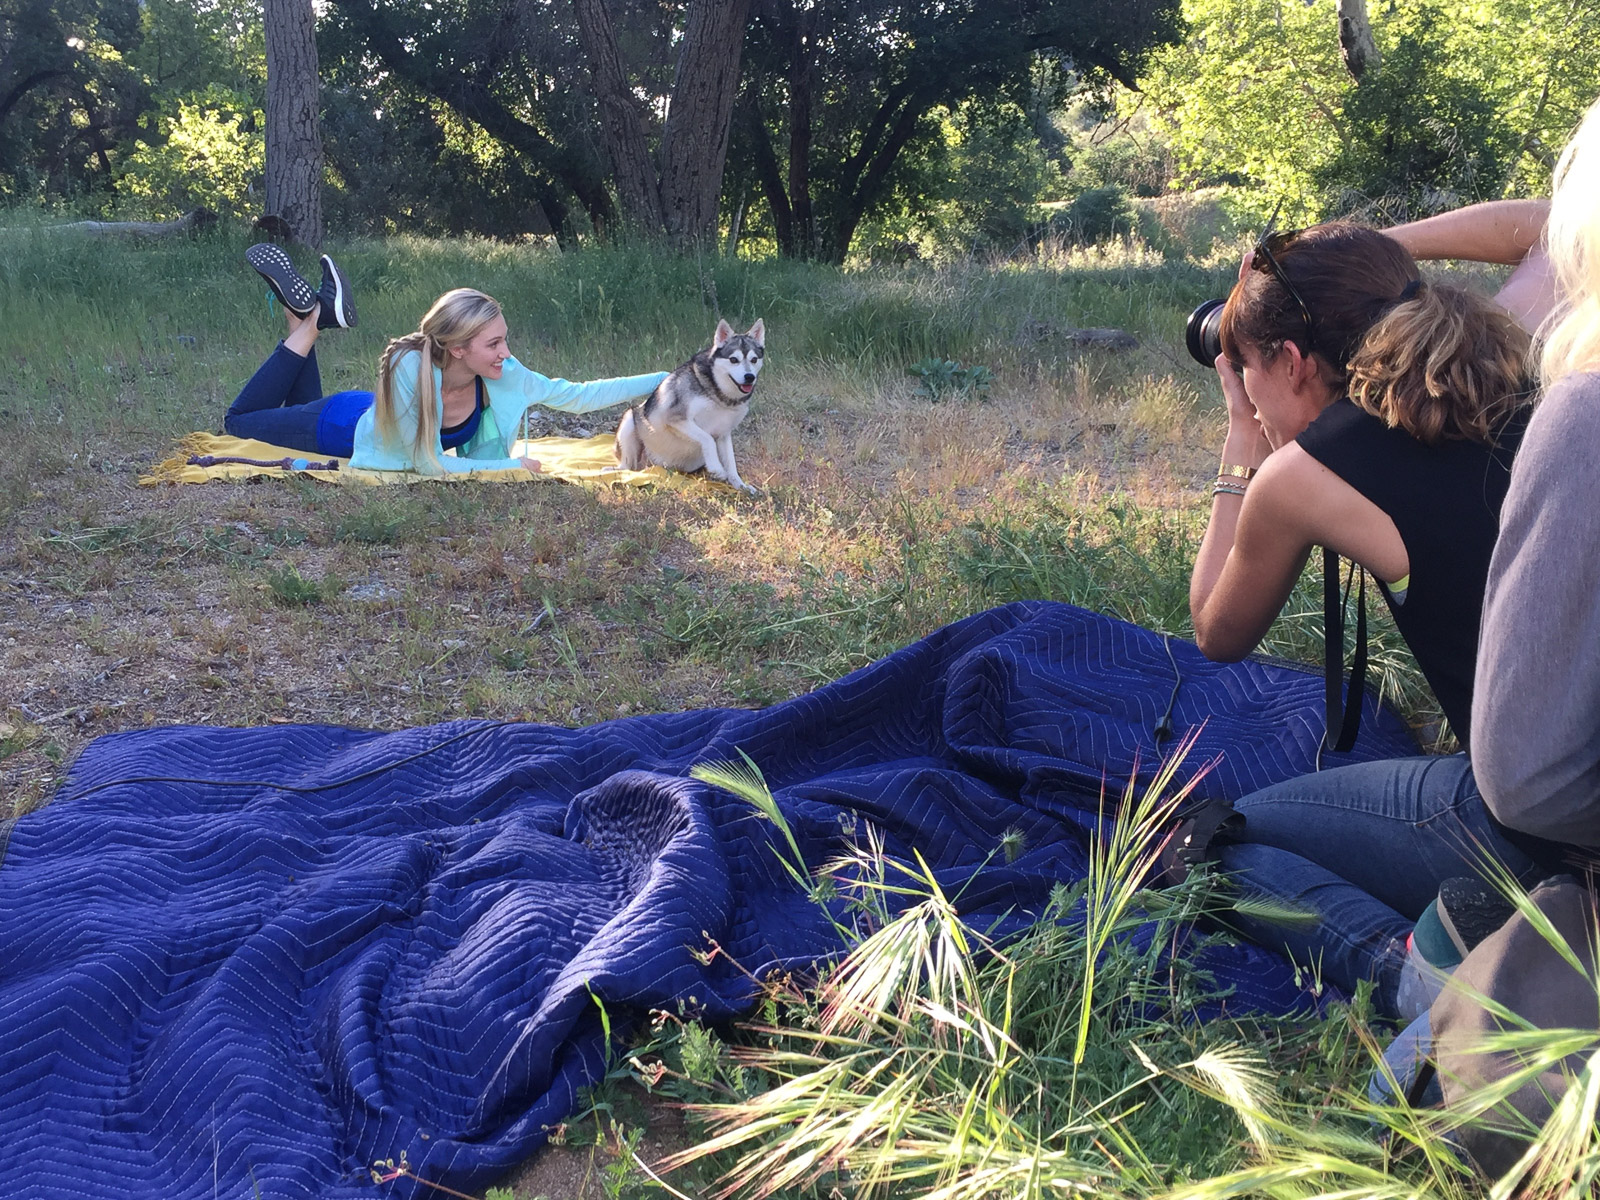 behind-the-scenes-dog-photographer-for-natural-balance-dog-food-commercial-campaign-girl-with-dog-picnic.jpg